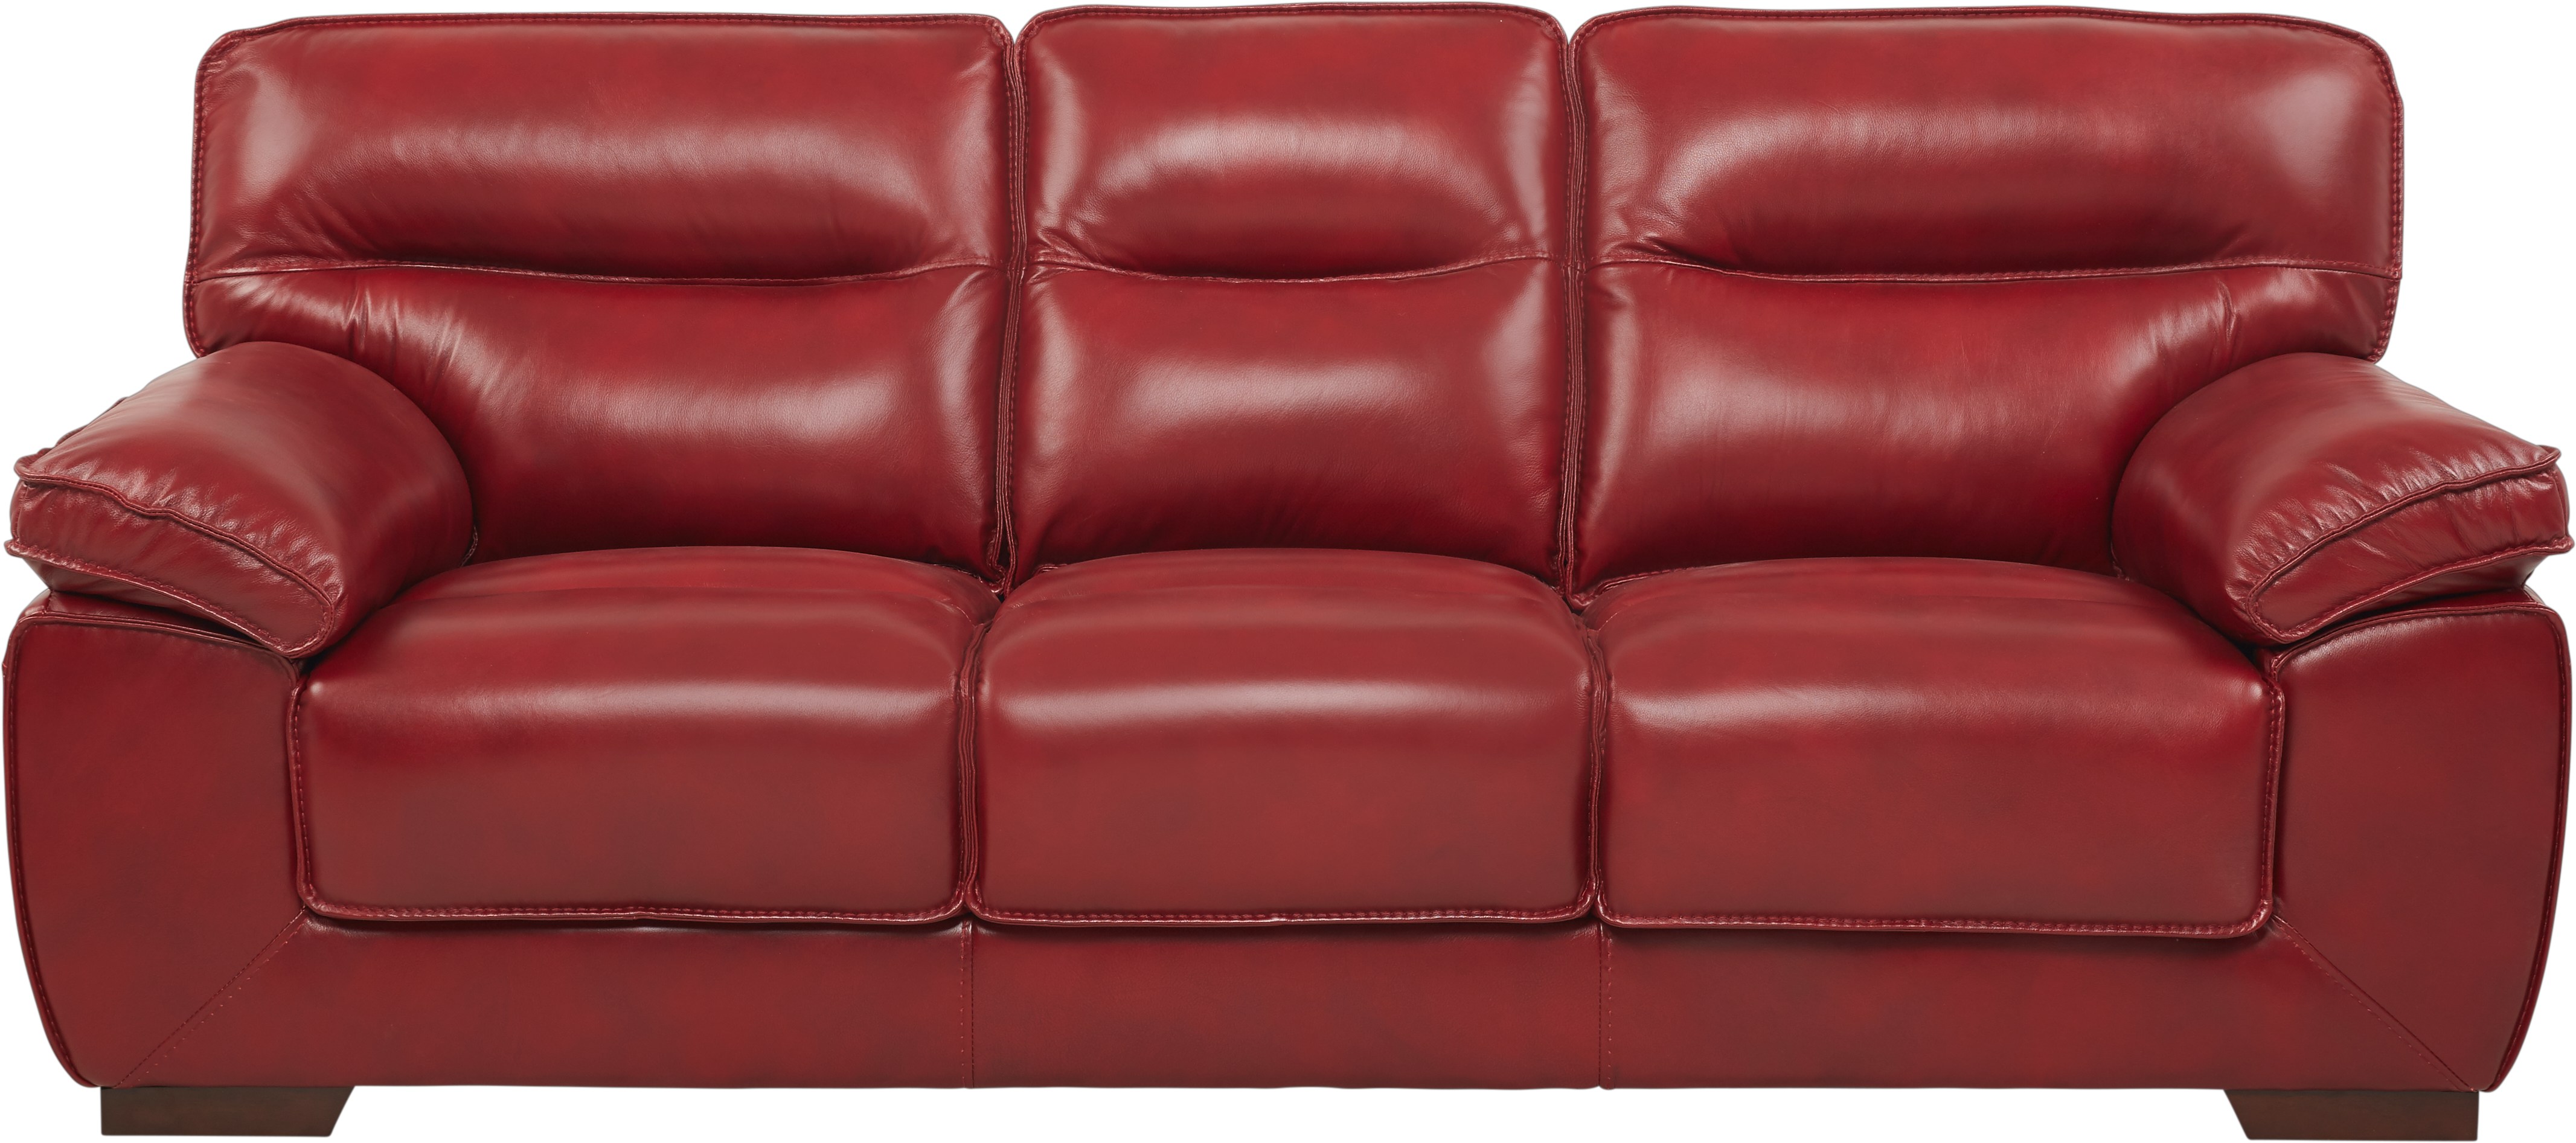 red leather sofa l shape